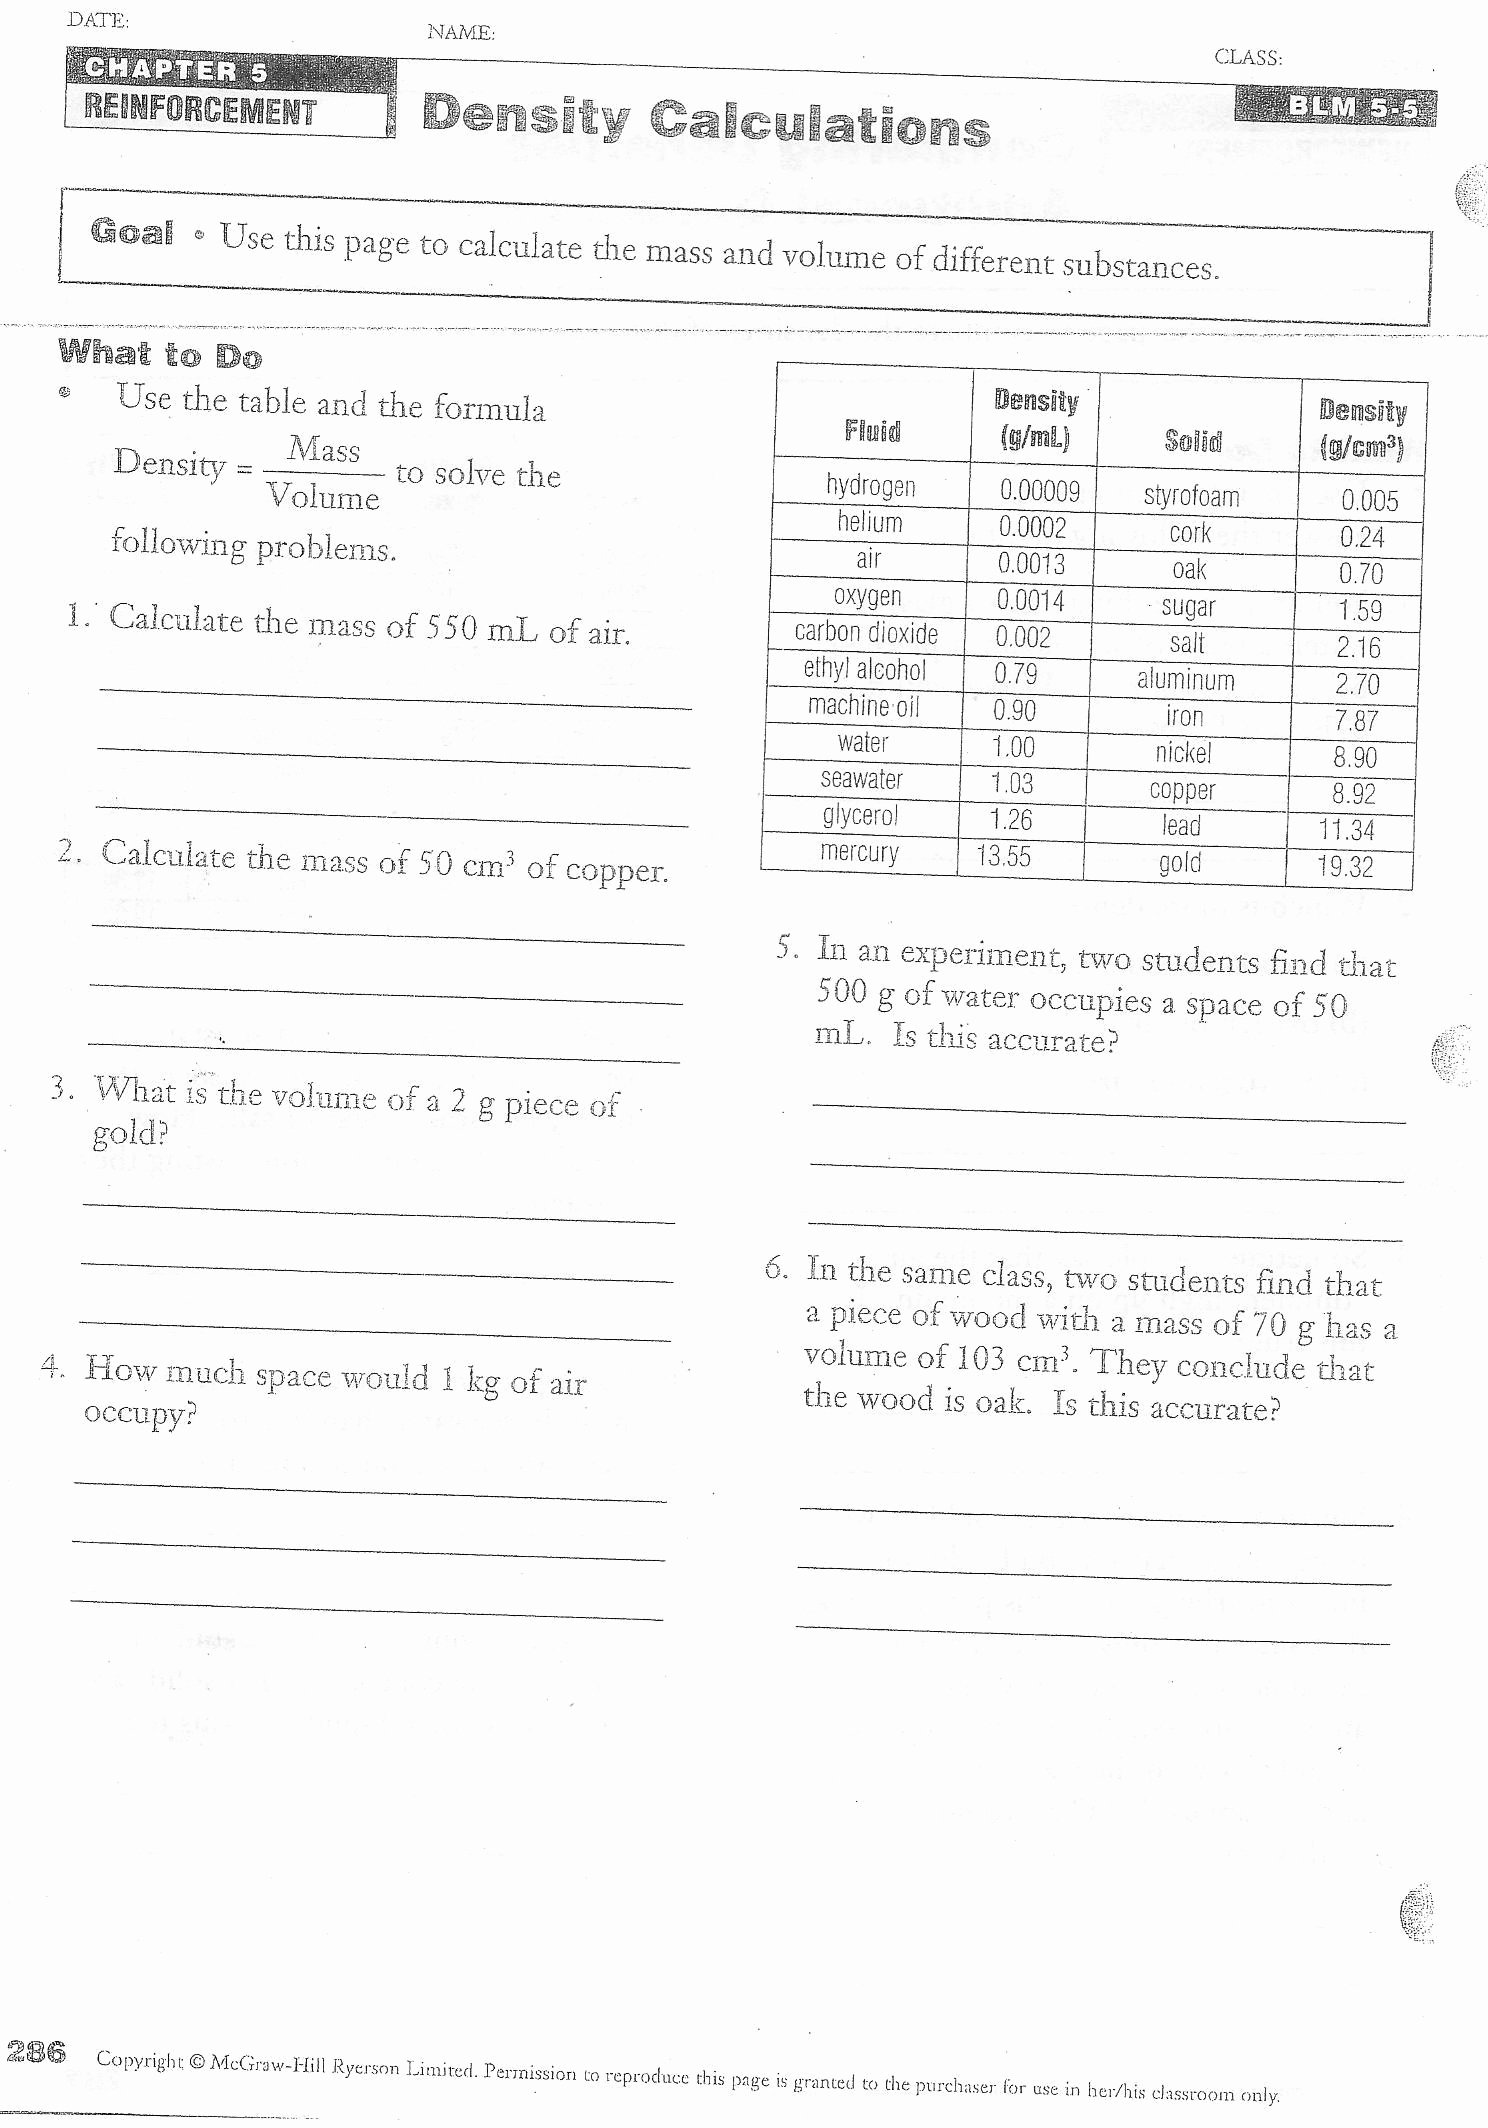 Science 8 Density Calculations Worksheet Awesome Density Calculations Worksheet Answers